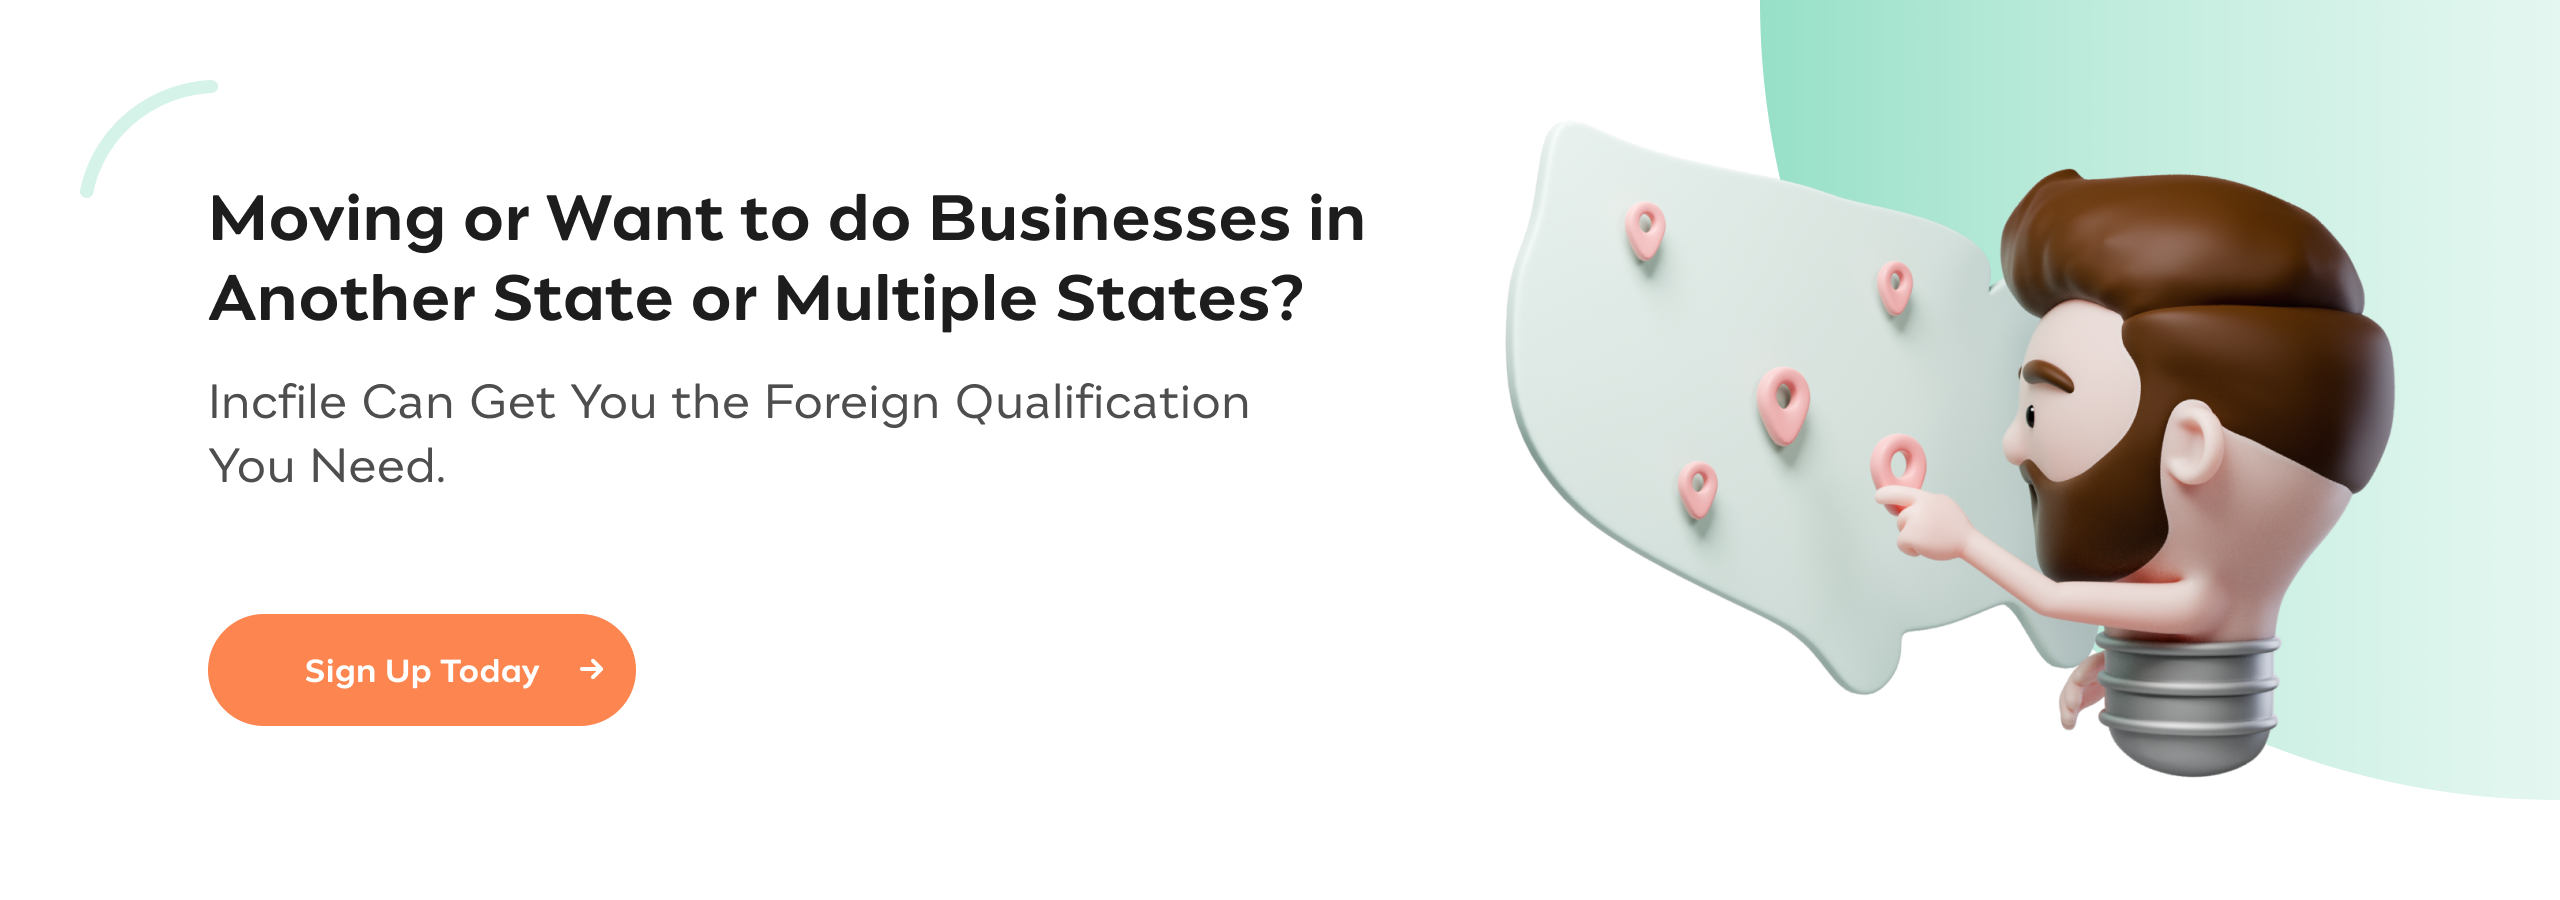 Moving or Want to do Business in Another State or Multiple States? Incfile can get you the Foreign Qualification you need.